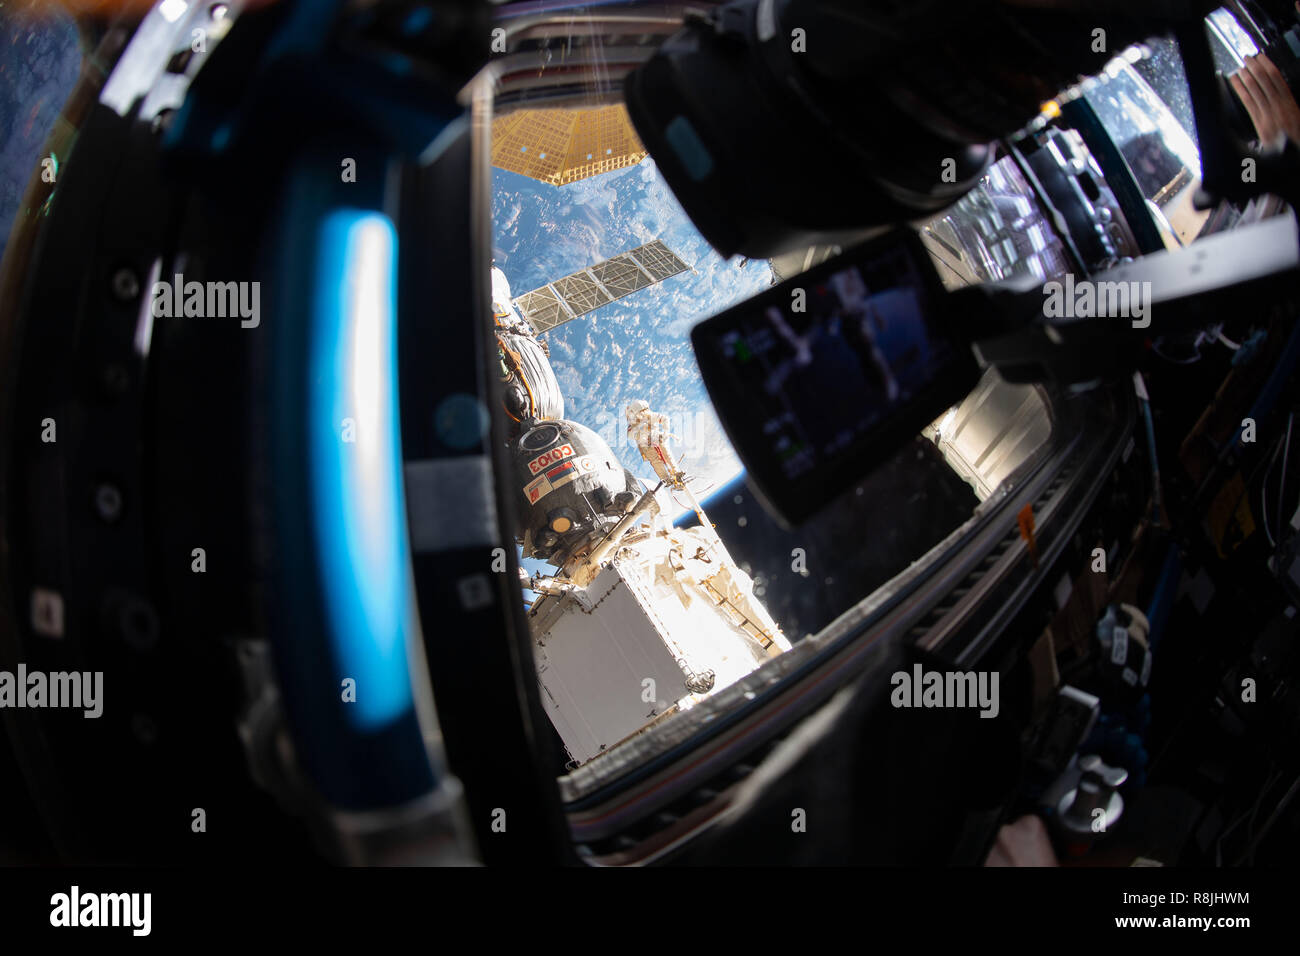 View looking out from the International Space Station as Russian spacewalker Oleg Kononenko attached to the Strela boom inspect the Soyuz MS-09 spacecraft December 11, 2018 in Earth Orbit. During the spacewalk, he and fellow spacewalker Sergey Prokopyev, examined the external hull of the Soyuz crew ship docked to the Rassvet module. The area corresponded with the location of a small hole inside the Soyuz habitation module that was found in August and caused a decrease in the space station’s pressure. The hole was fixed internally with a sealant within hours of its detection. During the spacewa Stock Photo